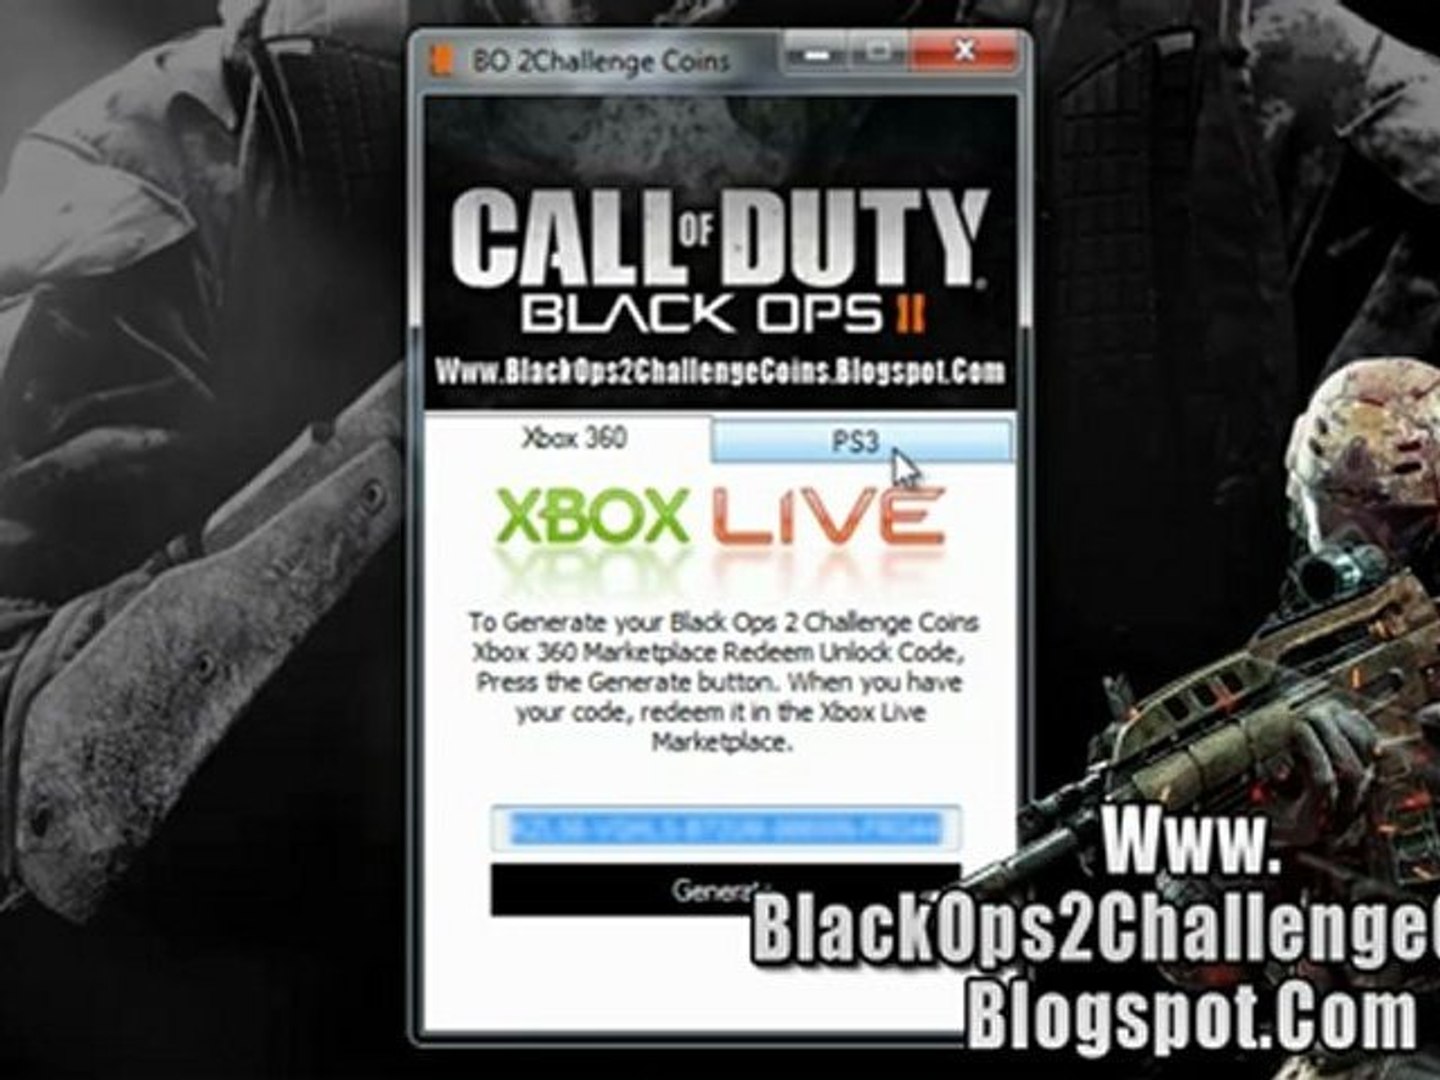 cent Conserveermiddel Hechting Get Free Black Ops 2 Challenge Coins Redeem Code - Xbox 360 - PS3 - video  Dailymotion